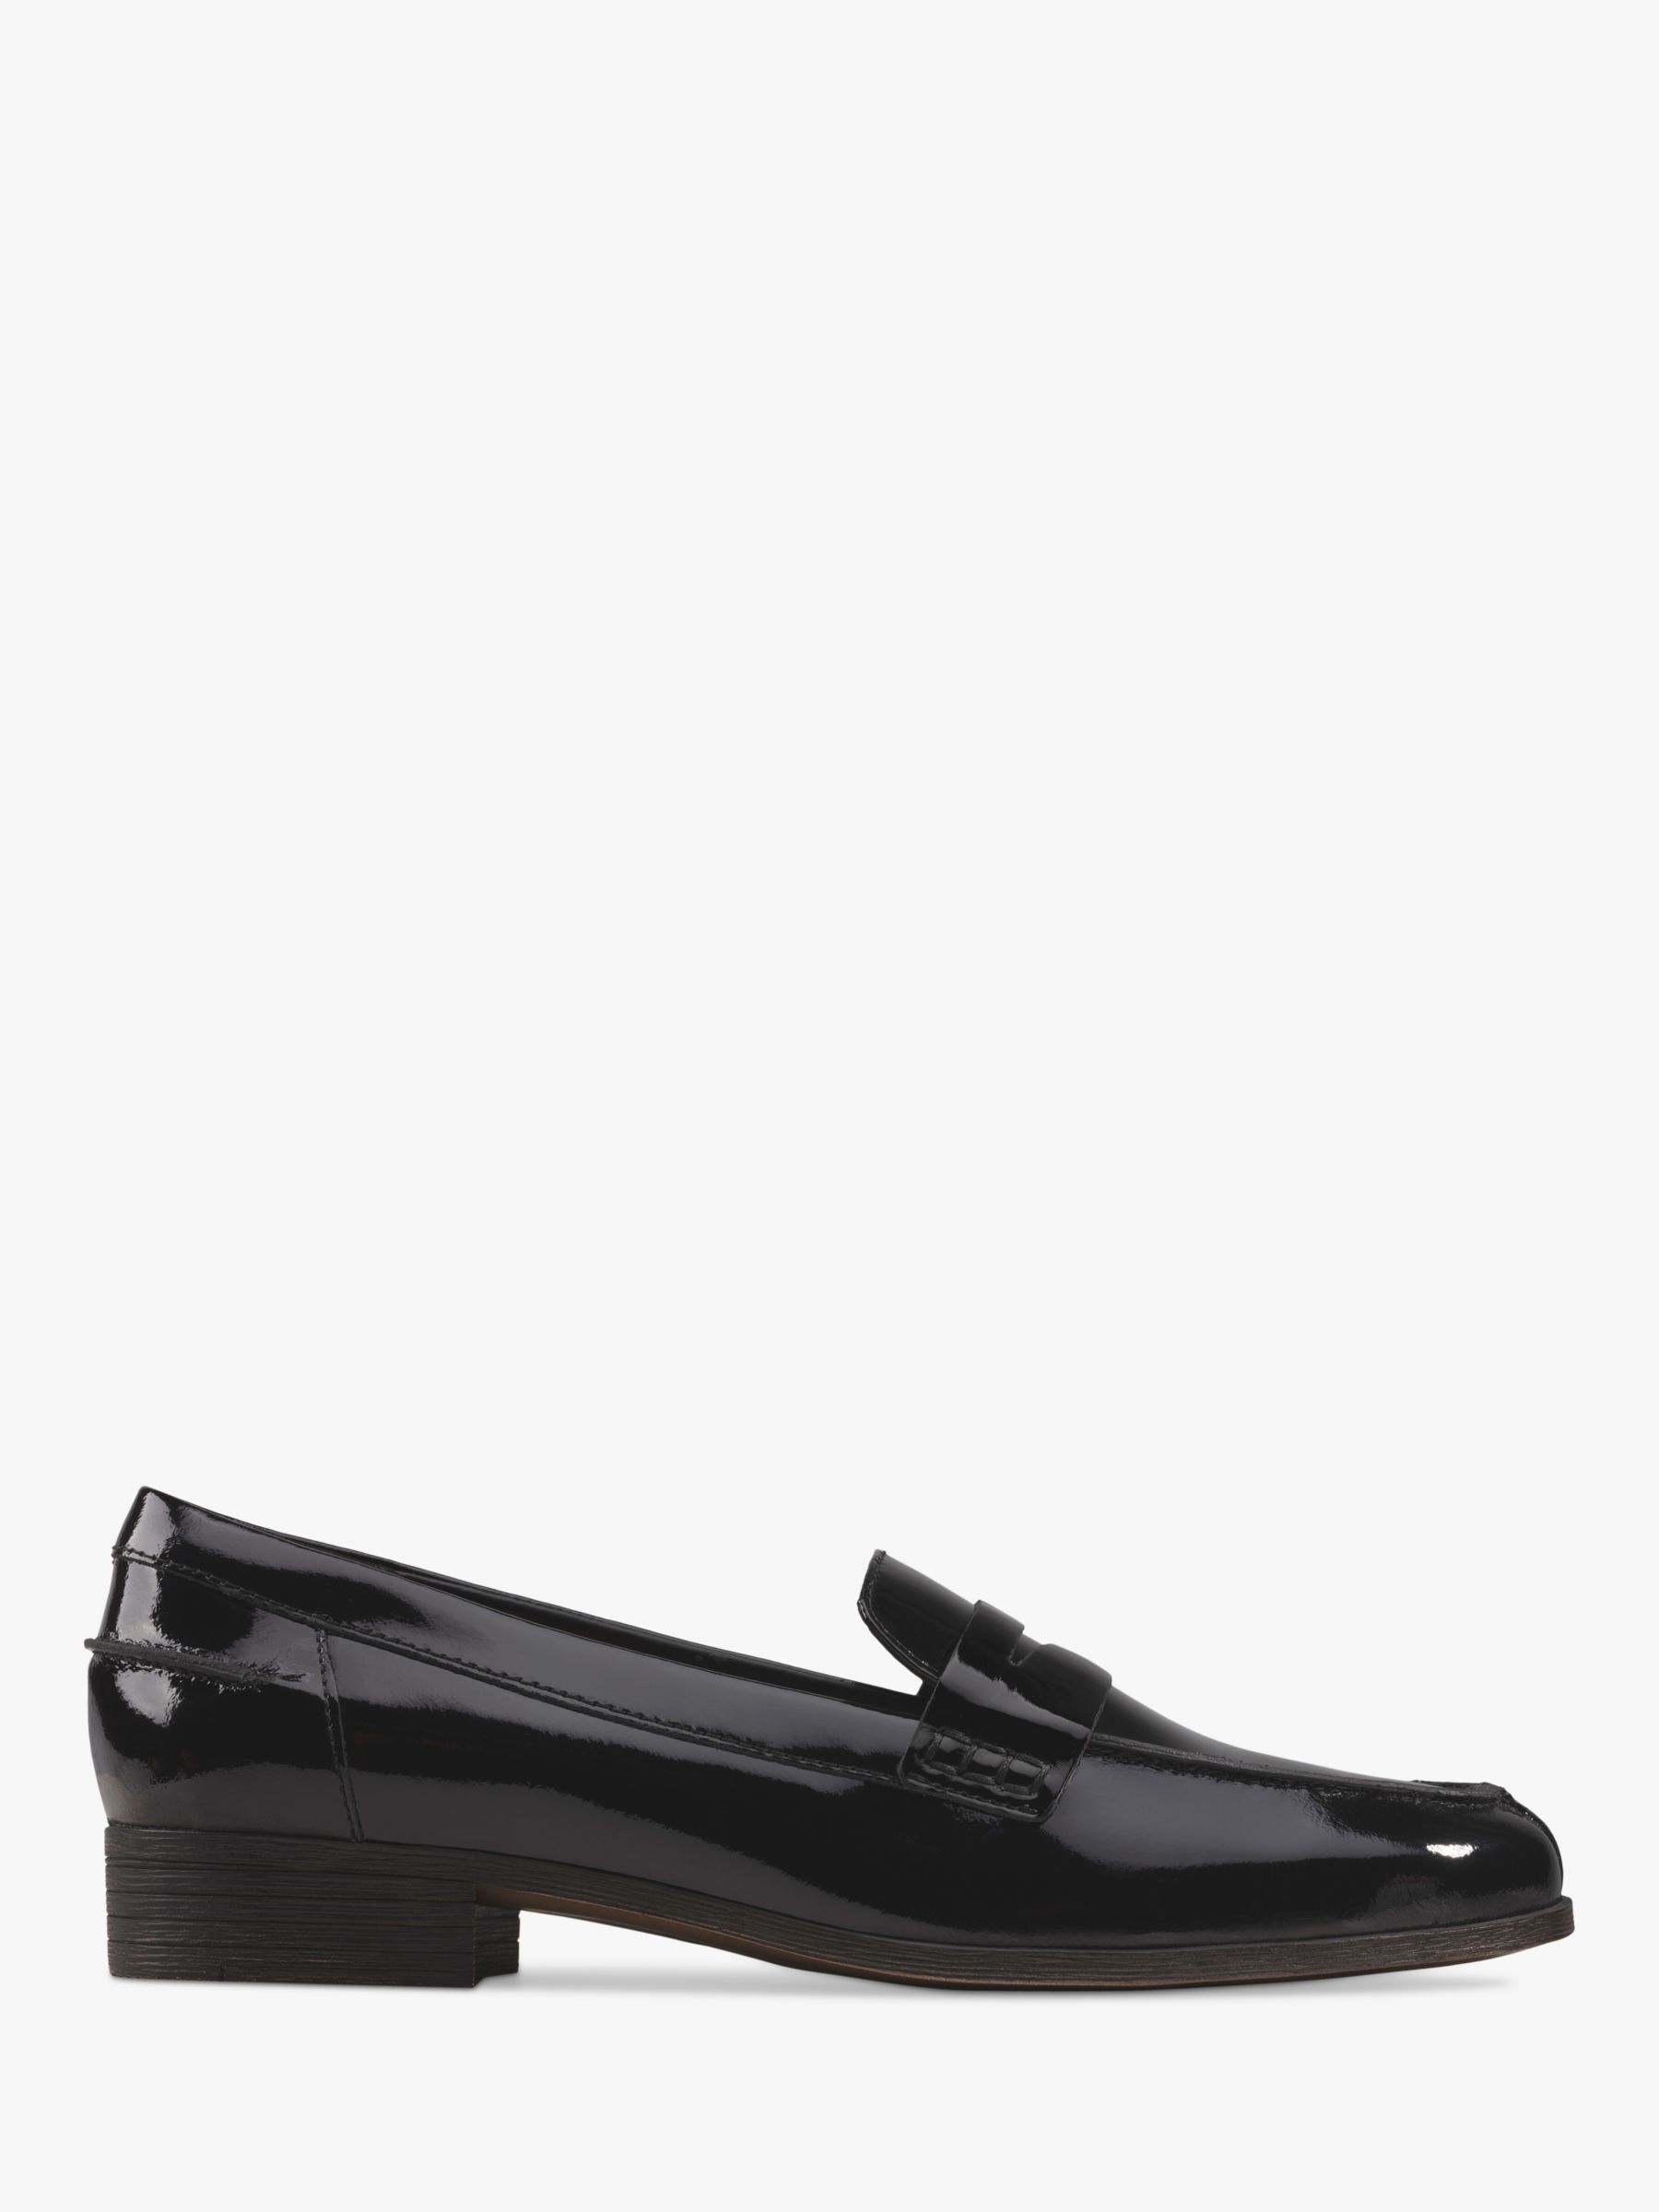 Clarks Hamble Leather Loafers, Black Patent at John Lewis & Partners